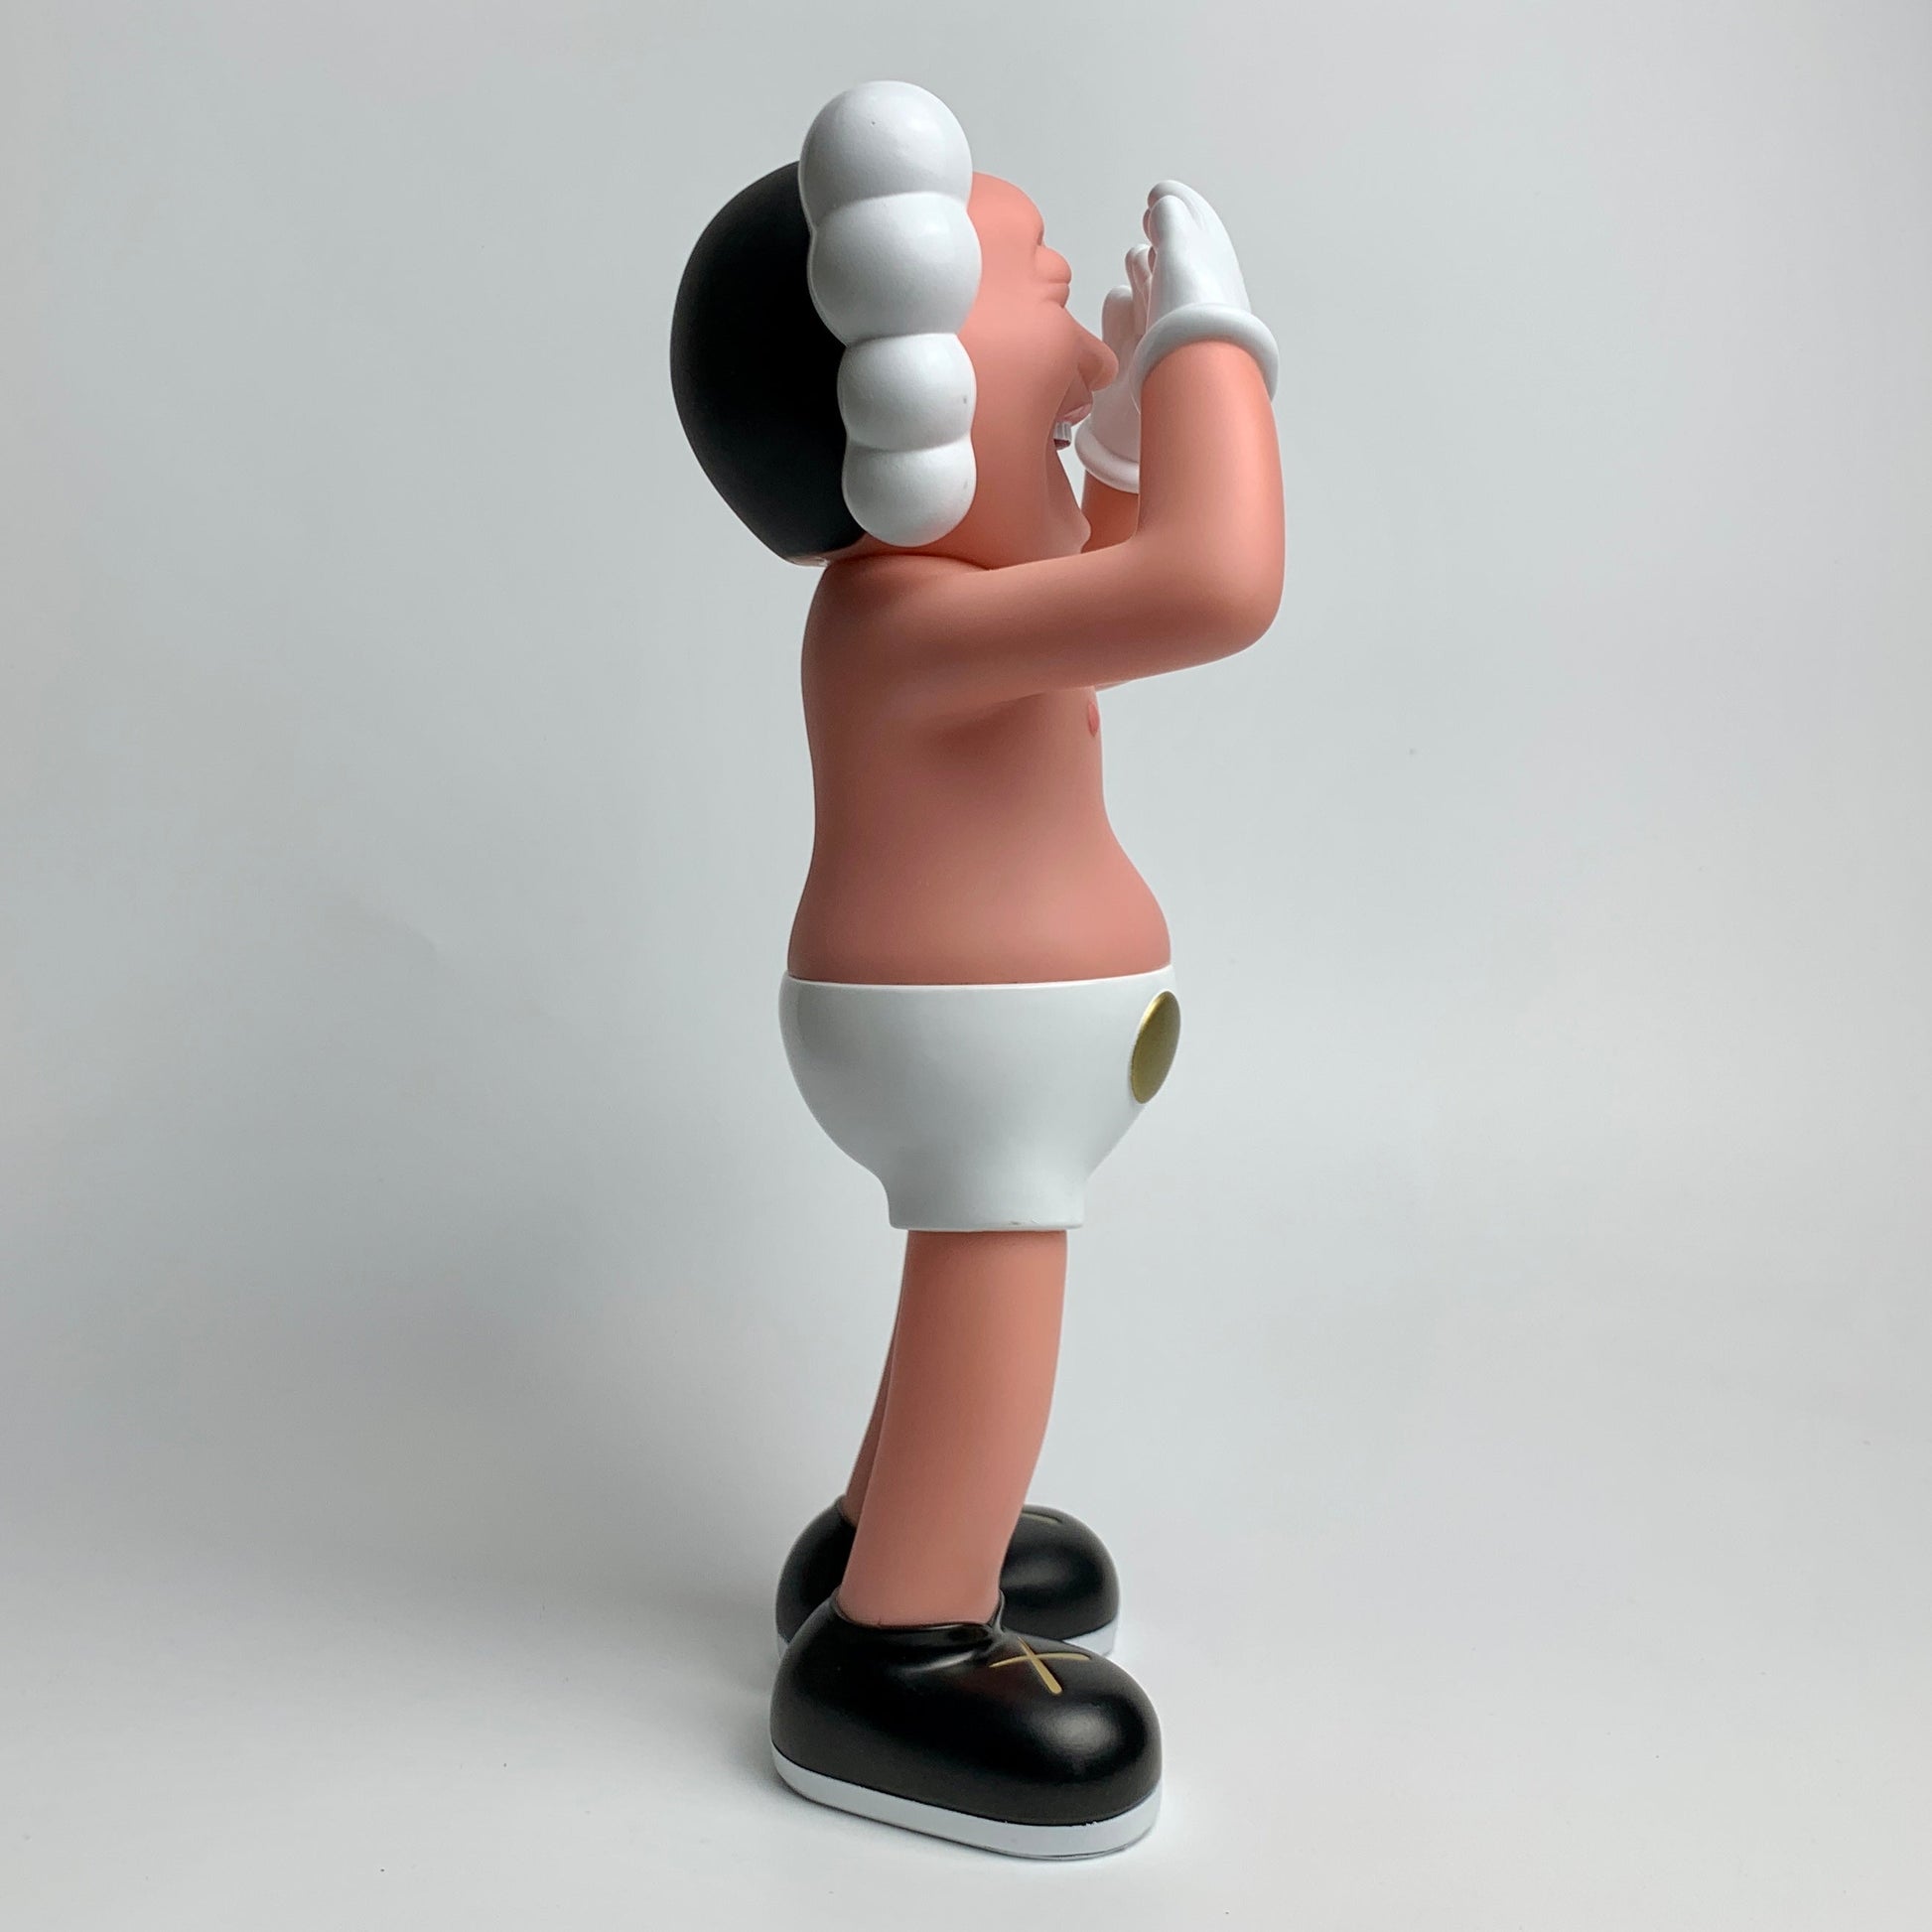 12 in KAWS Yue Minjun wholesale without box action figure